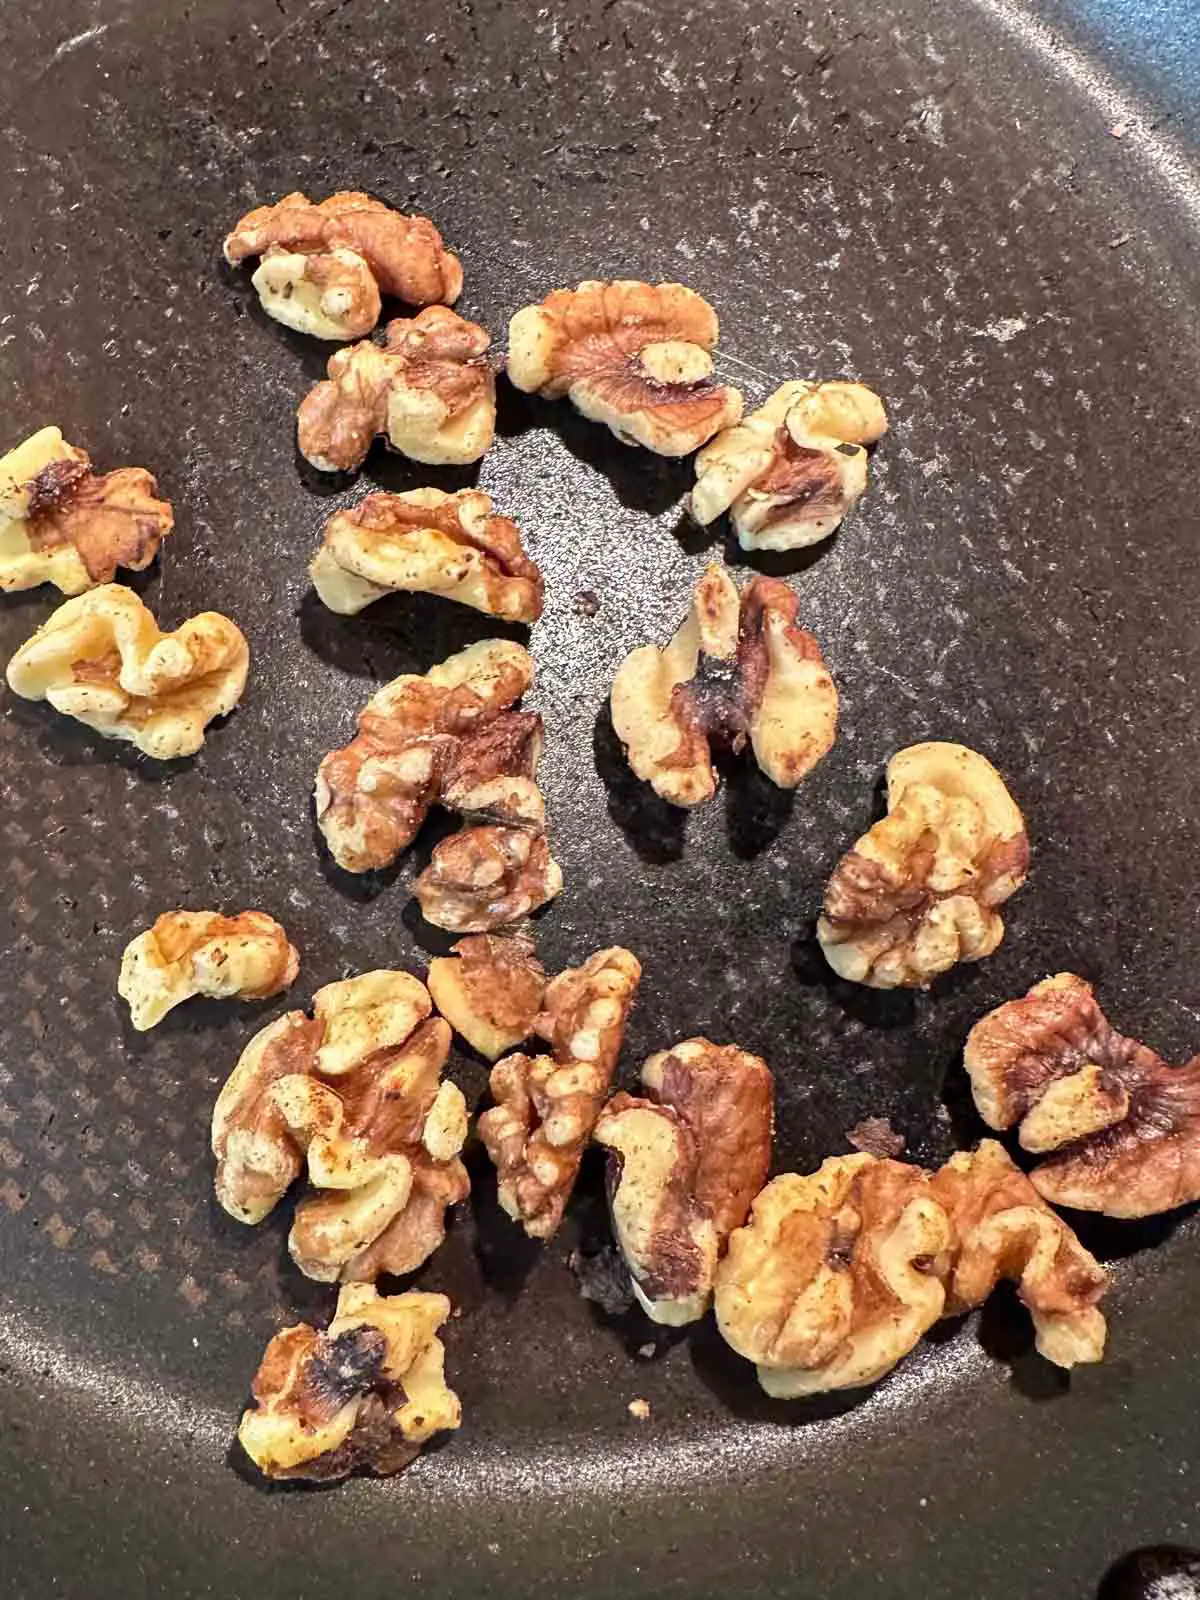 Toasted half walnuts in a skillet.